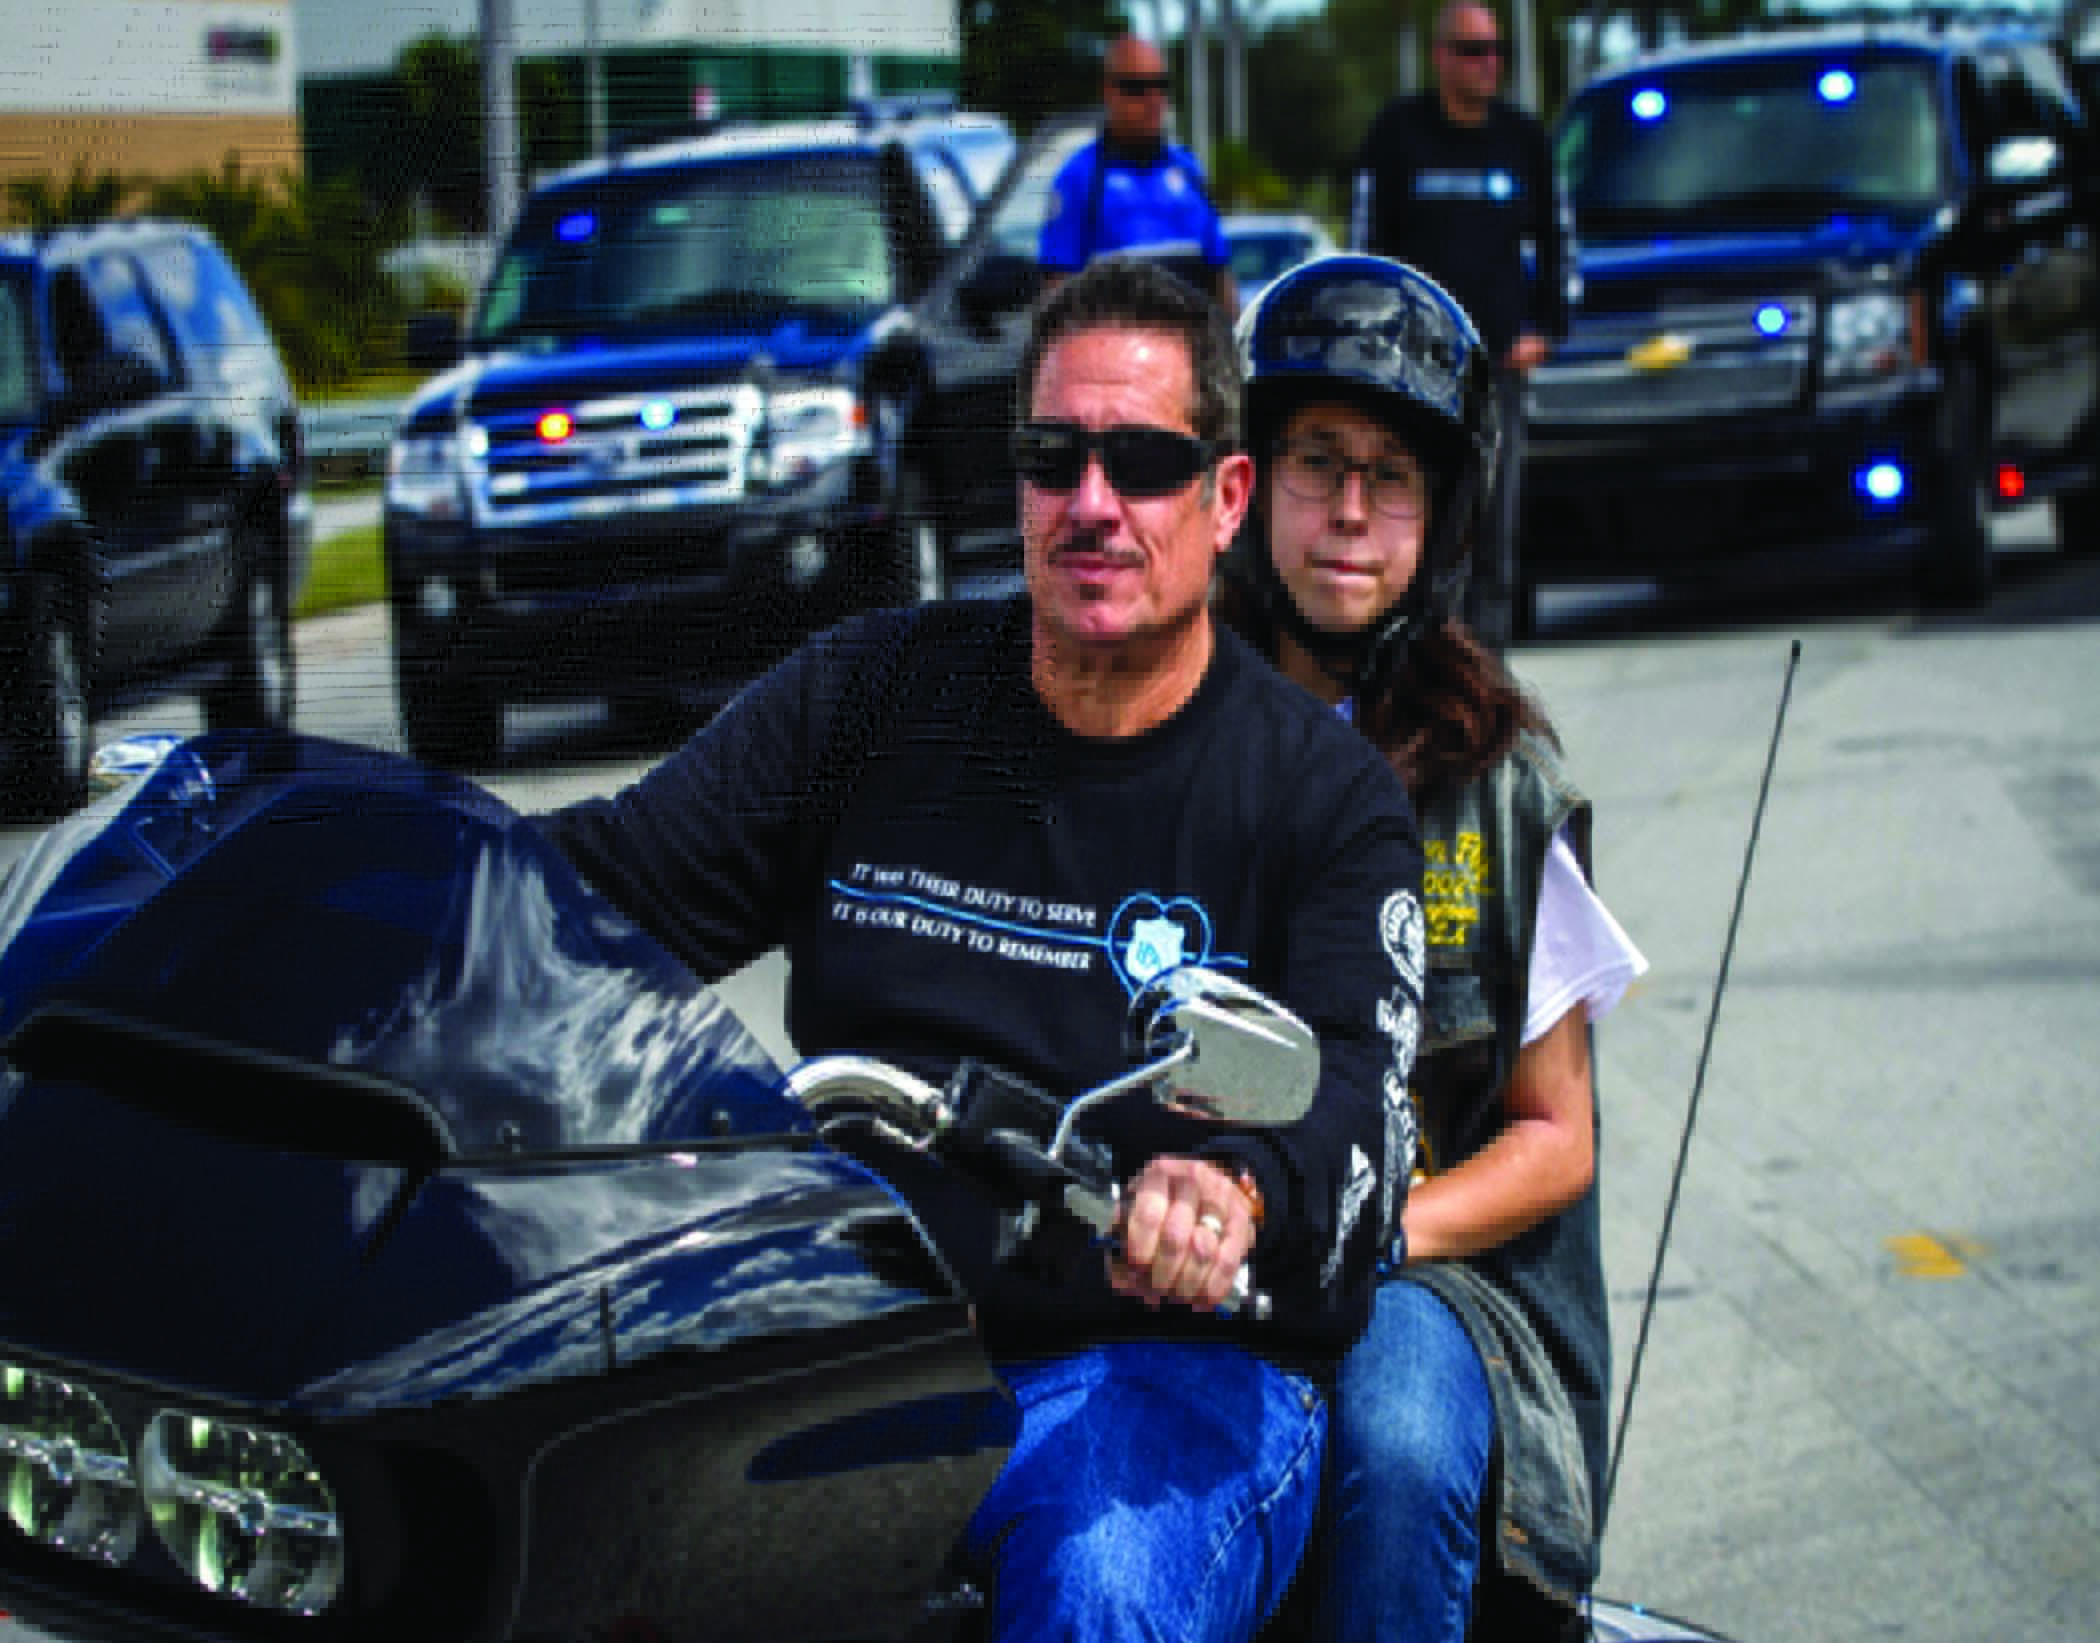 Support Our Police Ride & Rally